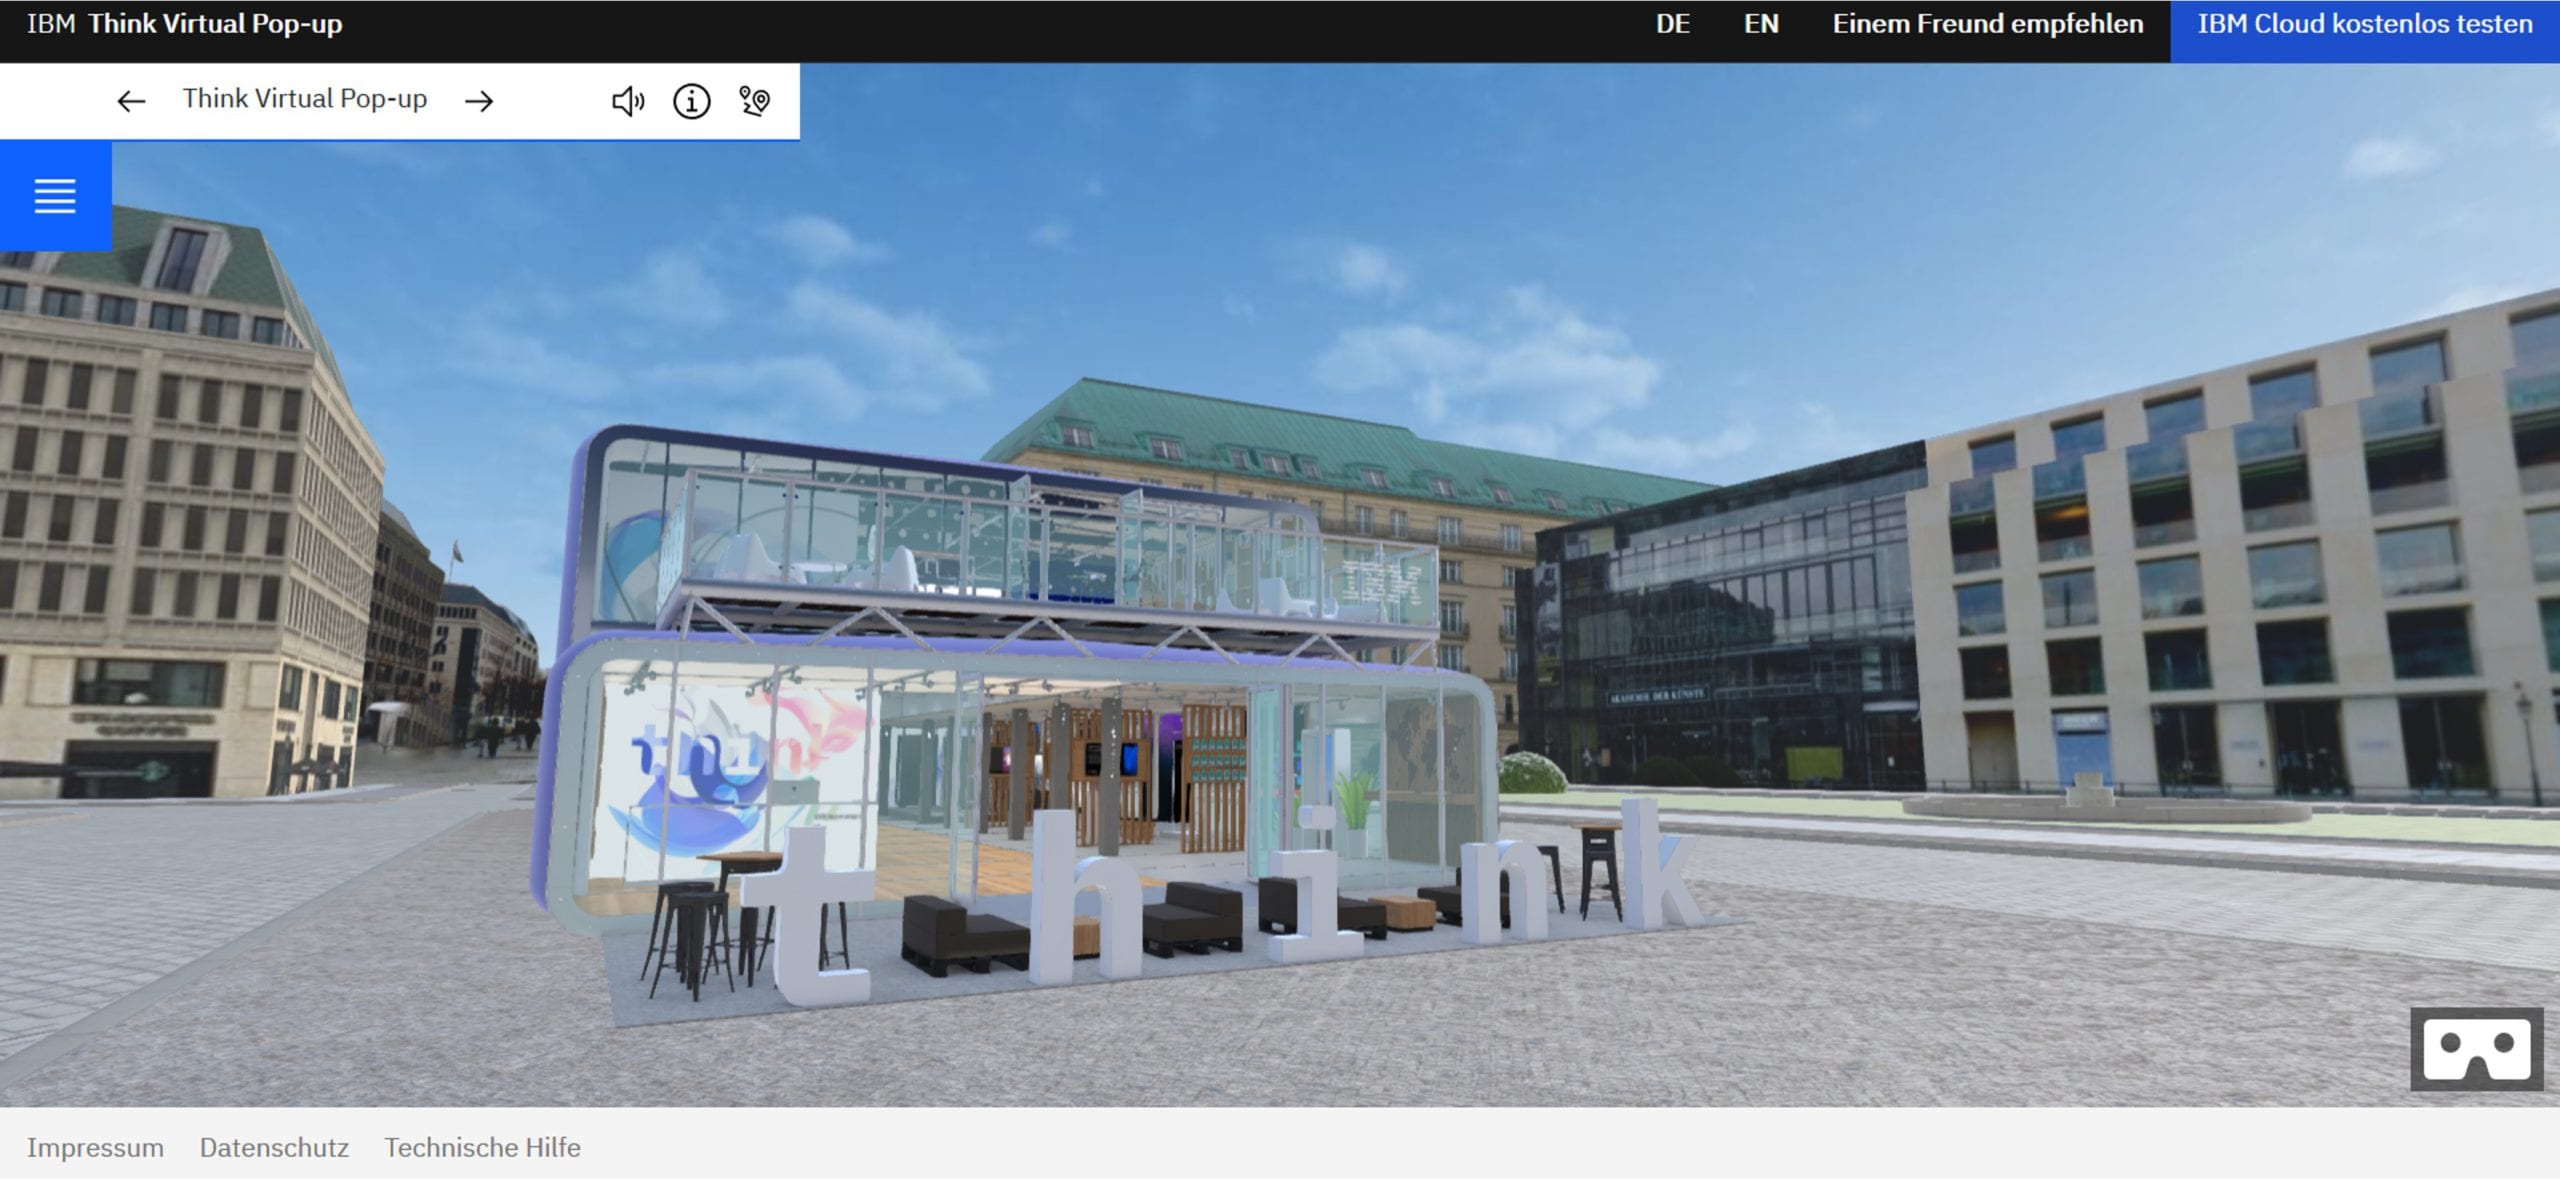 The Virtual Ibm Think Pop Up Ibm Selects Zreality Technology To Launch A Hybrid Event Platform In 3d And Virtual Reality Zreality Gmbh We Make Brands Come Alive In 3d Xr